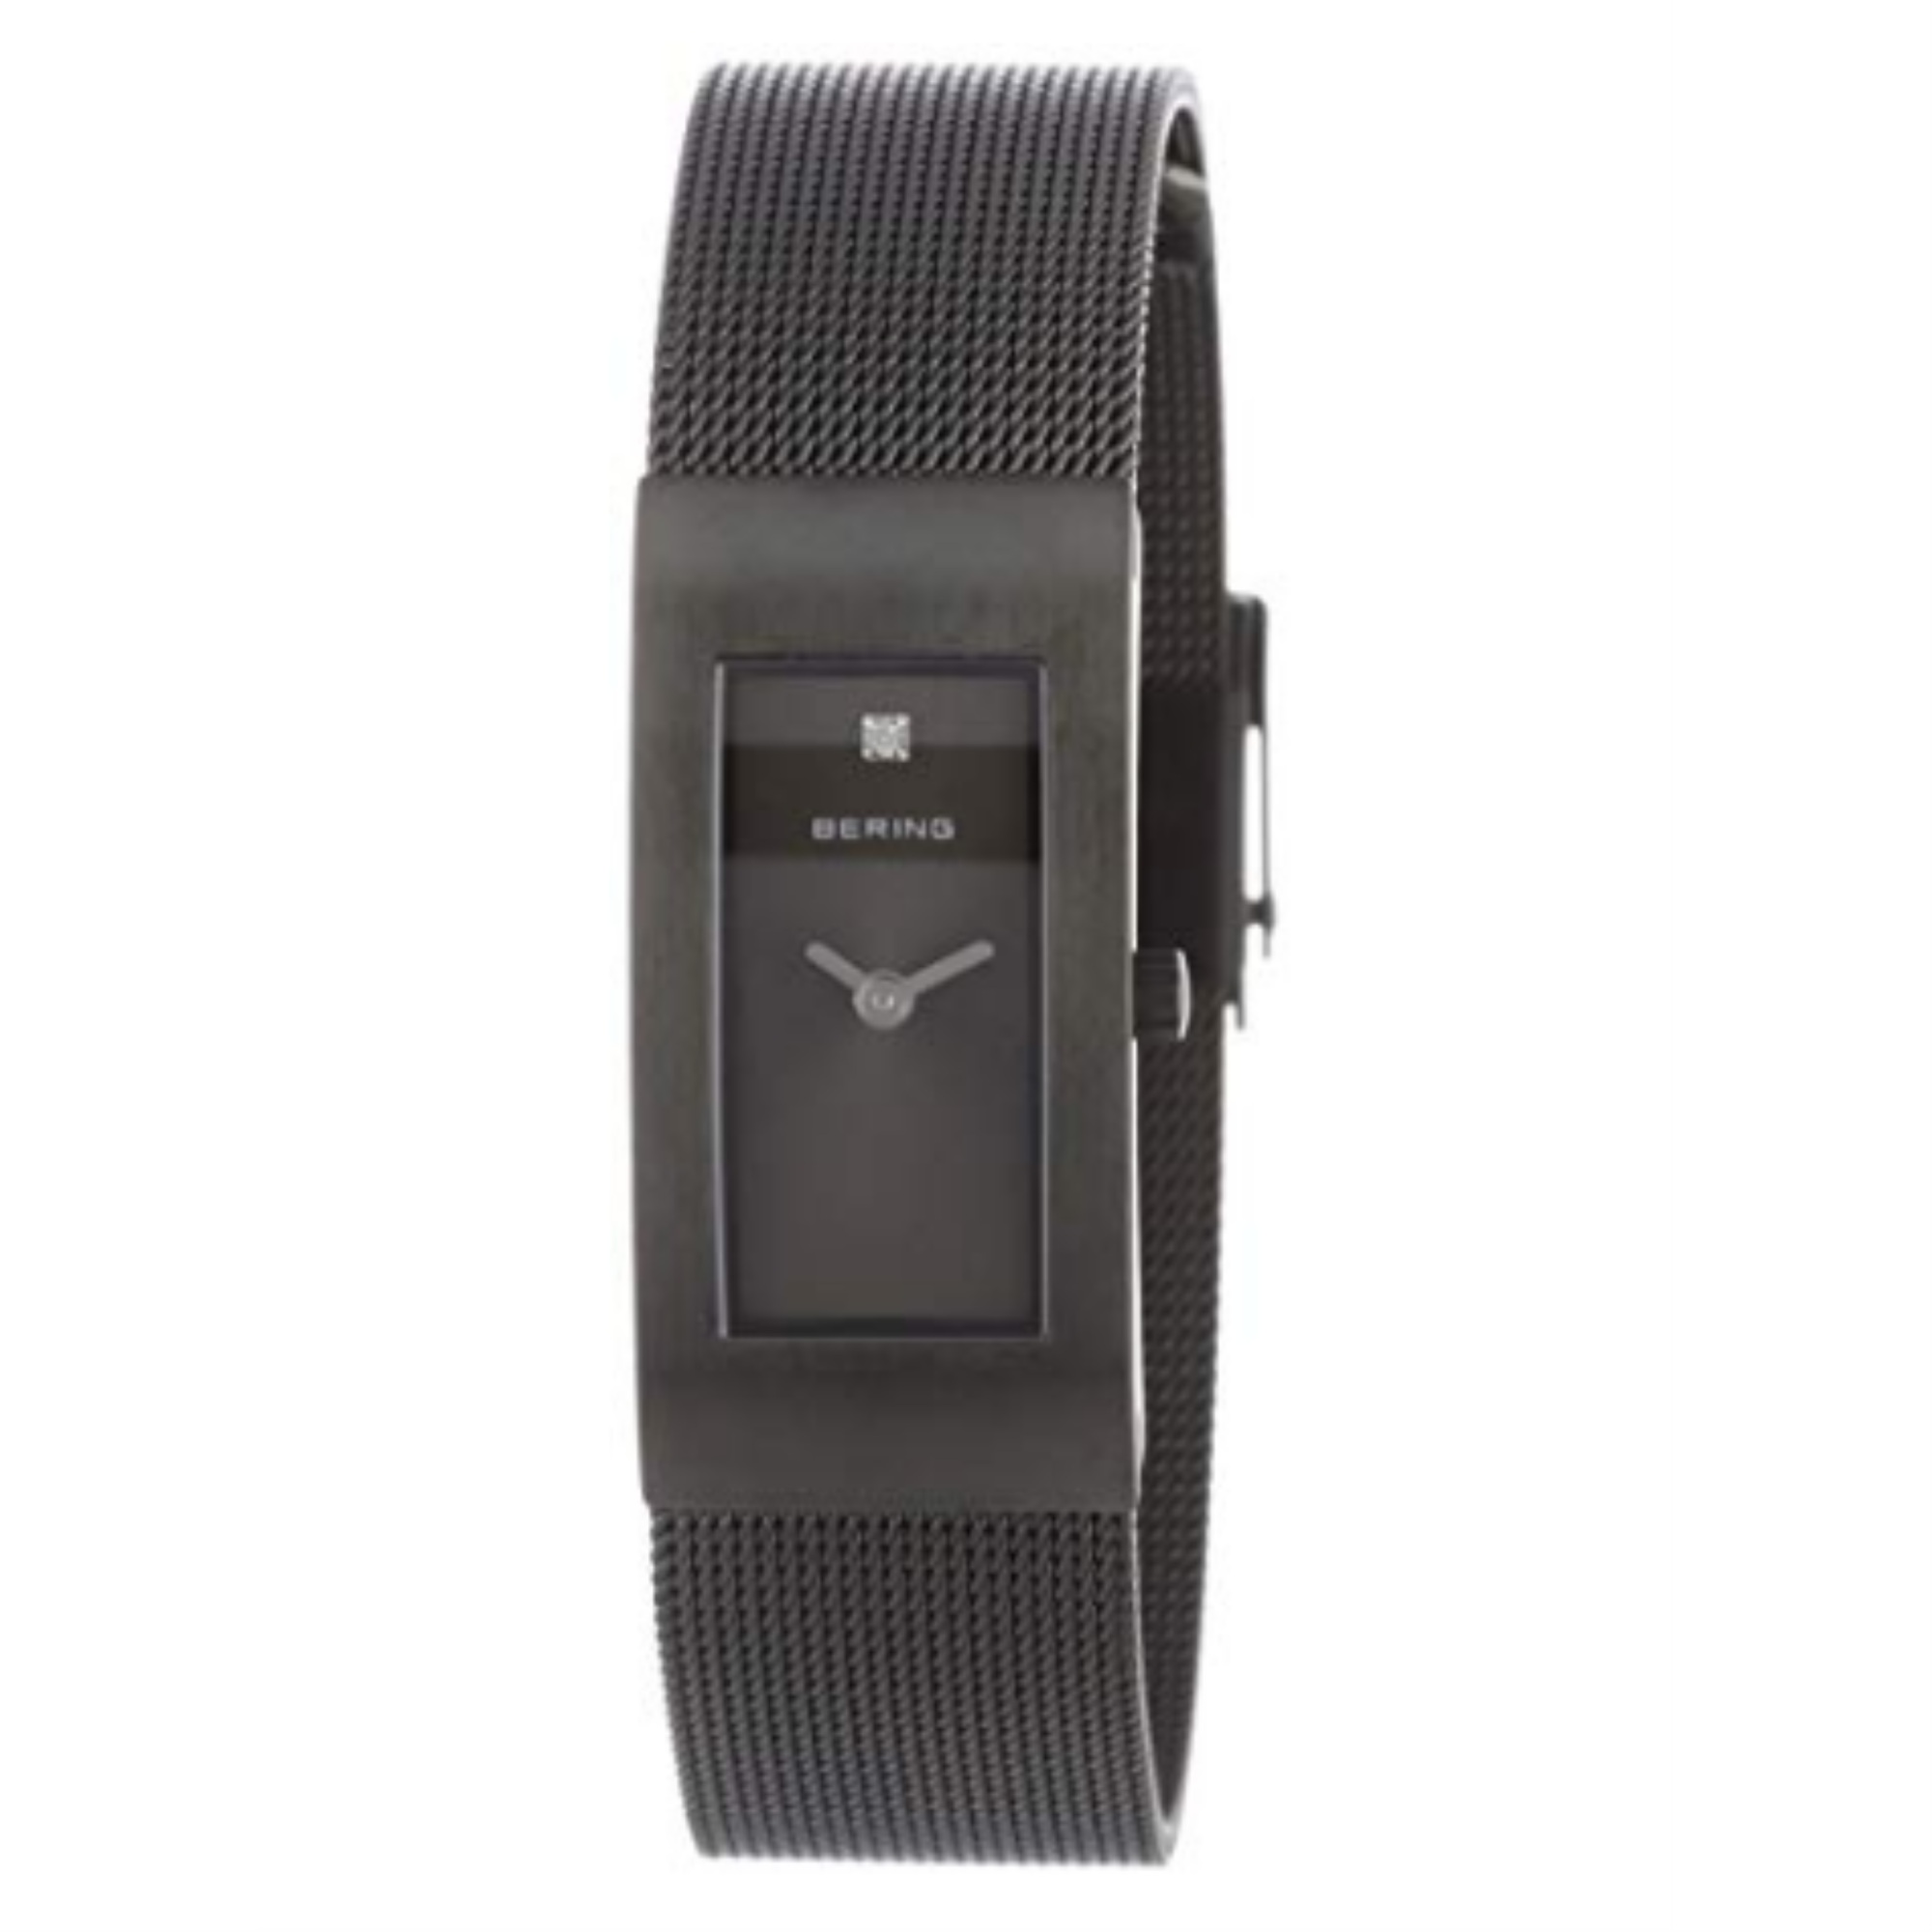 BERING Time 10817-077 Womens Classic Collection Watch with Mesh Band and Scratch Resistant Sapphire Crystal. Designed in Den